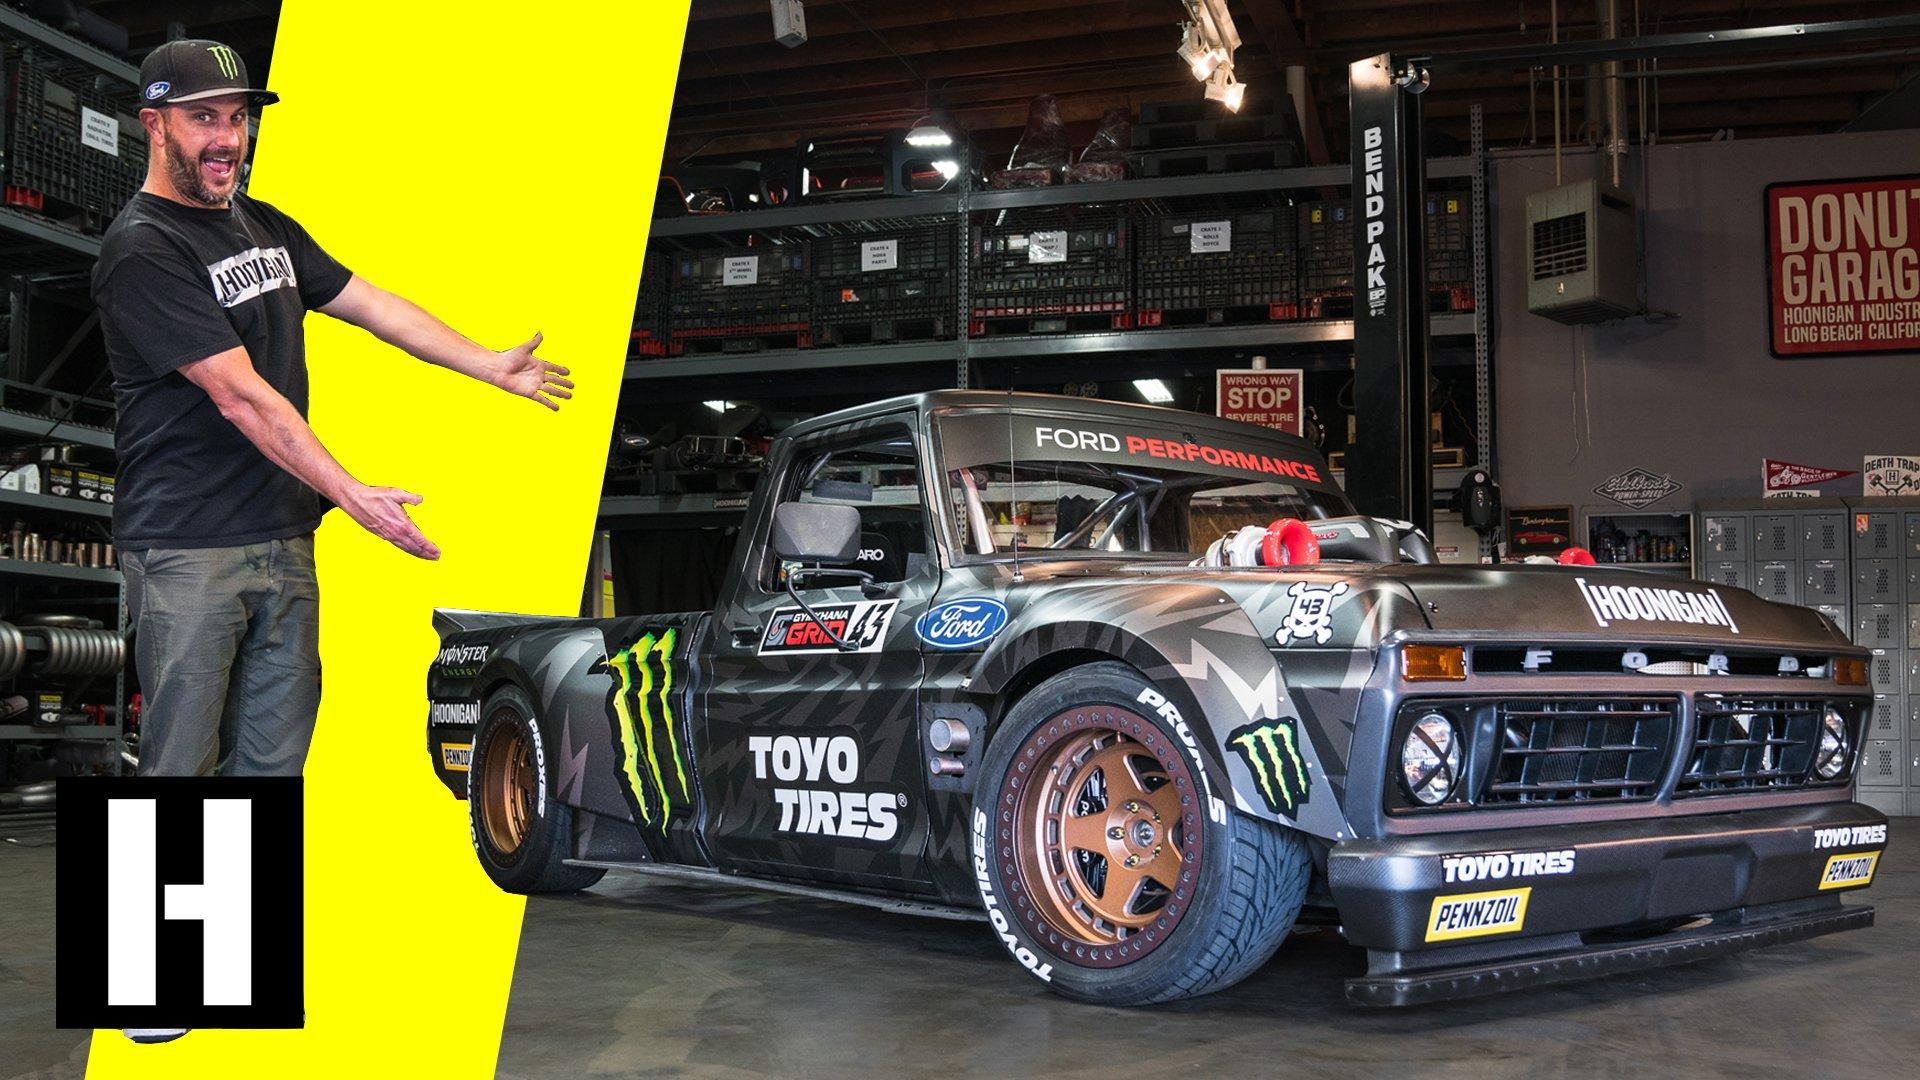 Ken Block's Hoonitruck: Twin Turbo, AWD, 914hp, and Ready to